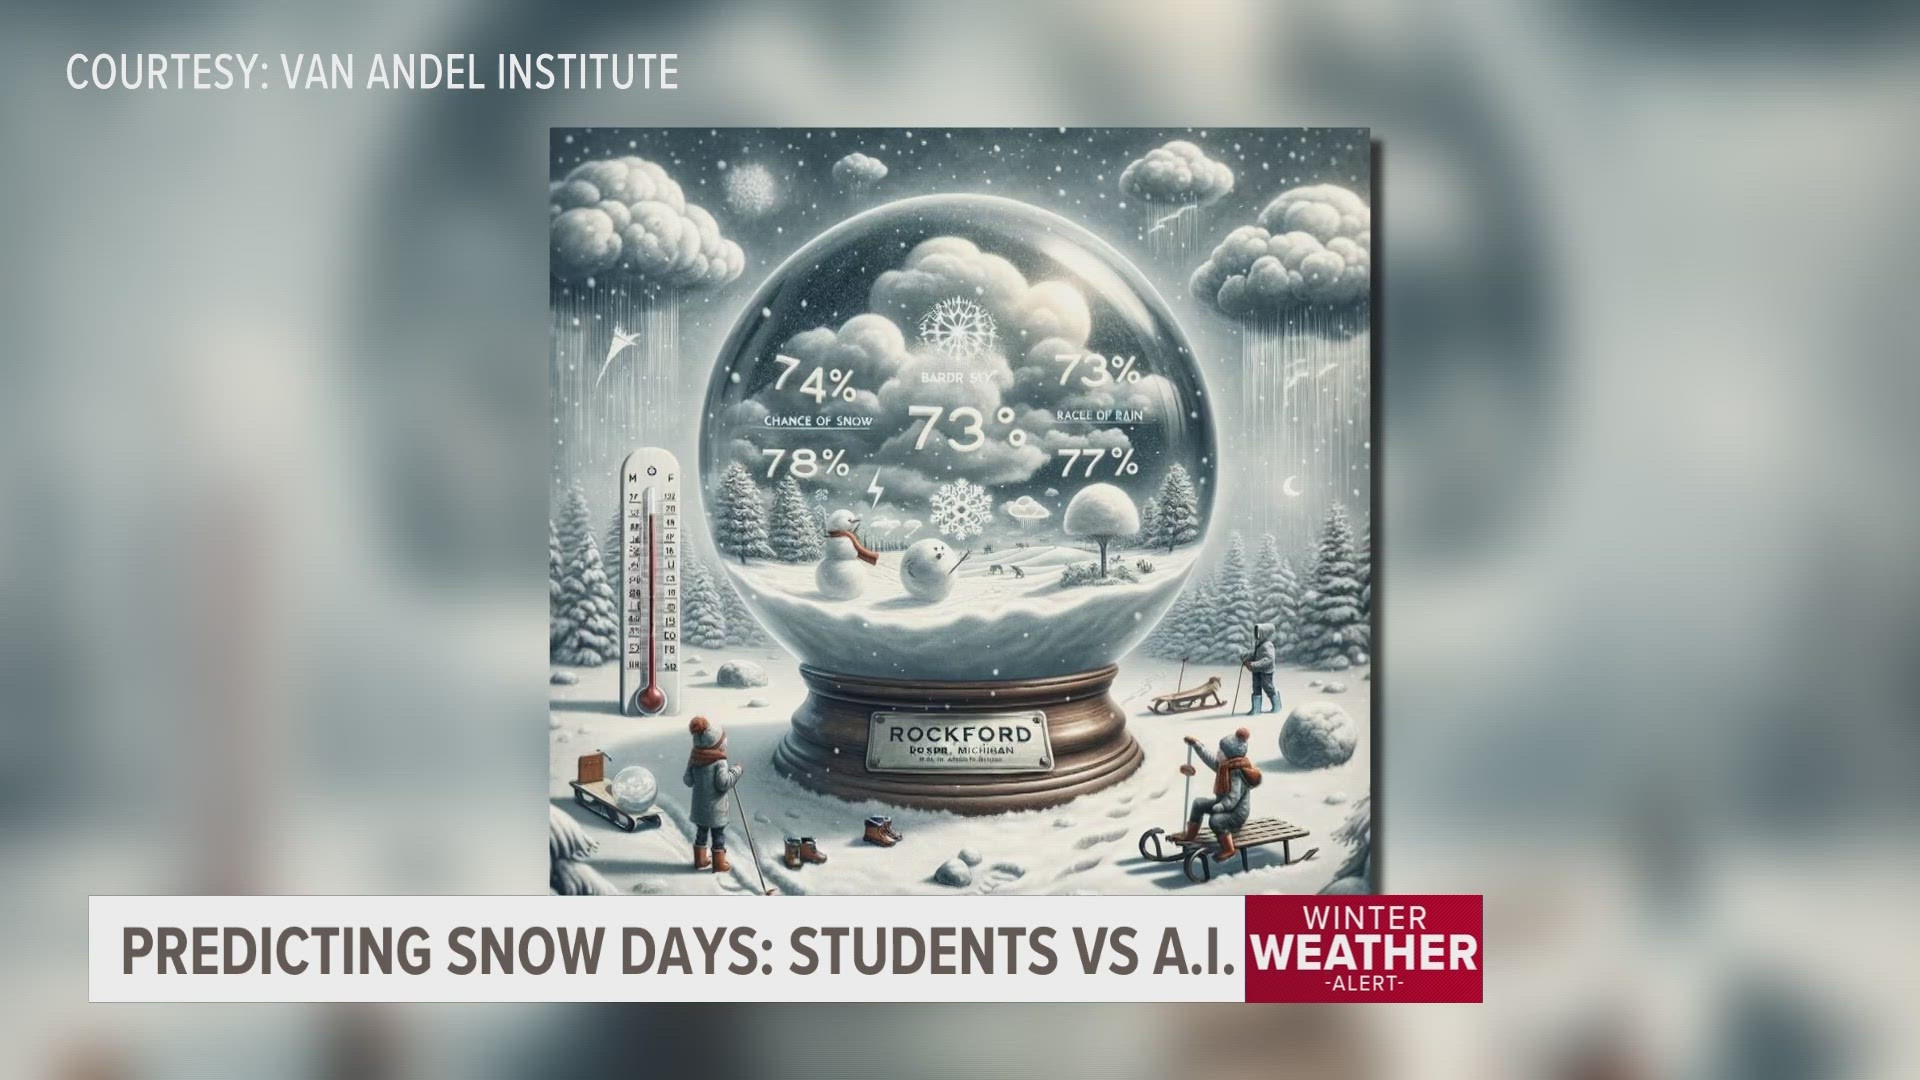 The students will continue with the program throughout the winter, meeting each winter weather advisory with a chance to prove they're better at statistics than AI.